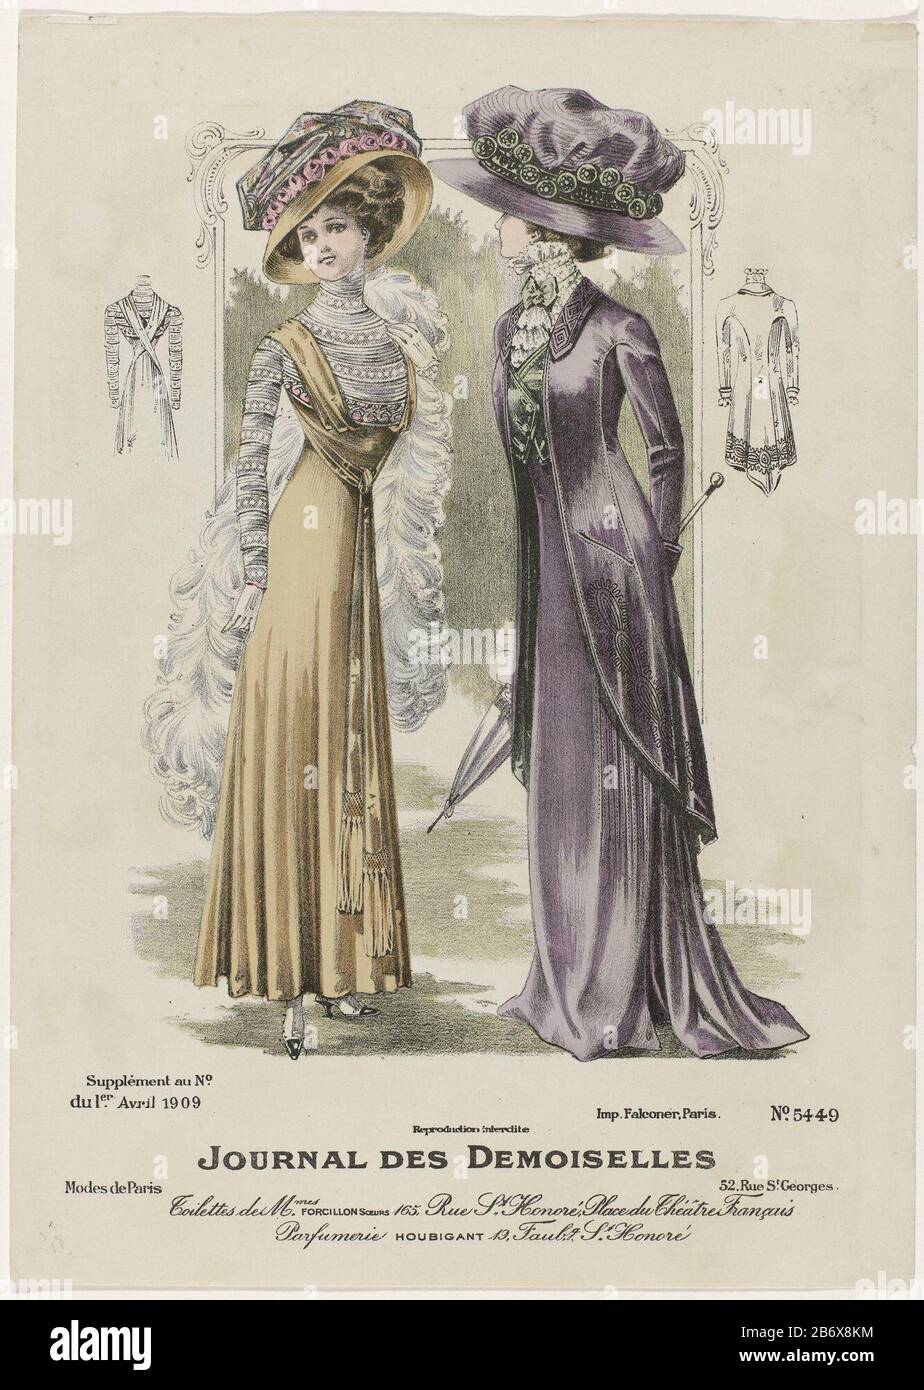 Woman in an ankle-length gown with high waist, Where: come from the shoulder straps to together in a knot; at the ends brushes. Striped bodice with long sleeves. Long stole around the shoulder. Big hat decorated with flowers. Woman in a long coat with rounded fronts in a short jacket and long skirt with split. Netting fork () with bow. Beach umbrella(?). According to the legend they wear 'toilettes' of MES Forcillon Soeurs. Print out the fashion magazine Journal des Demoiselles (1833 -1922) . Manufacturer : printmaker: anonymous printer: Falconer (listed property) Place manufacture: Paris Date Stock Photo